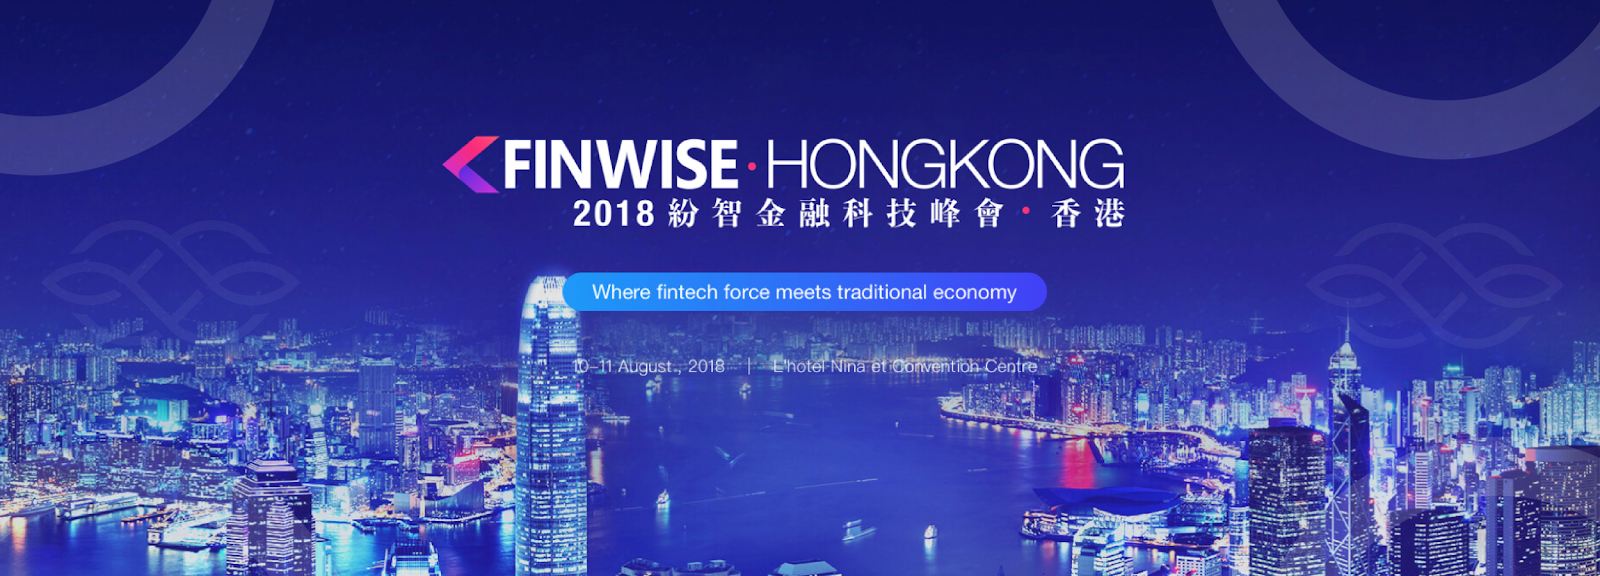 IAGON Attends the FinWise Summit in Hong Kong